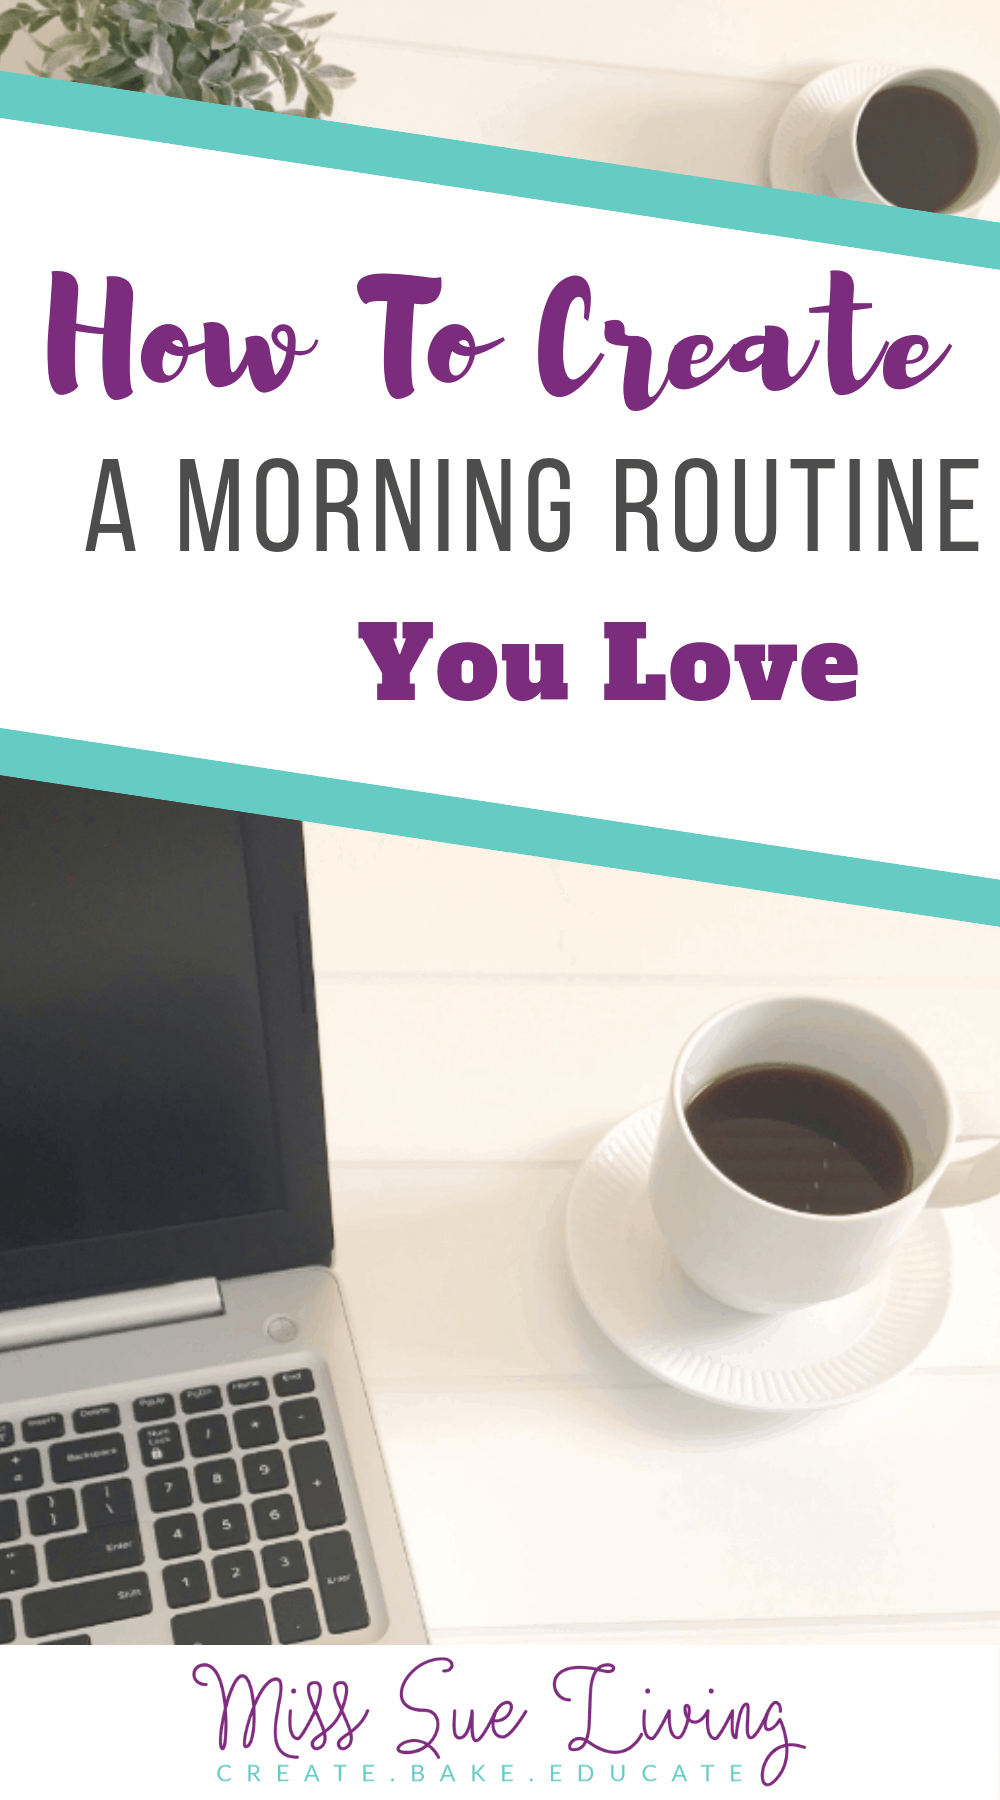 How To Create A Morning Routine You Love, how to create a morning routine, best morning routine for success, simple morning routine, create a morning routine, how to create a morning routine tips, how to morning routine, how to create a morning ritual, #morningroutine #morningschedule